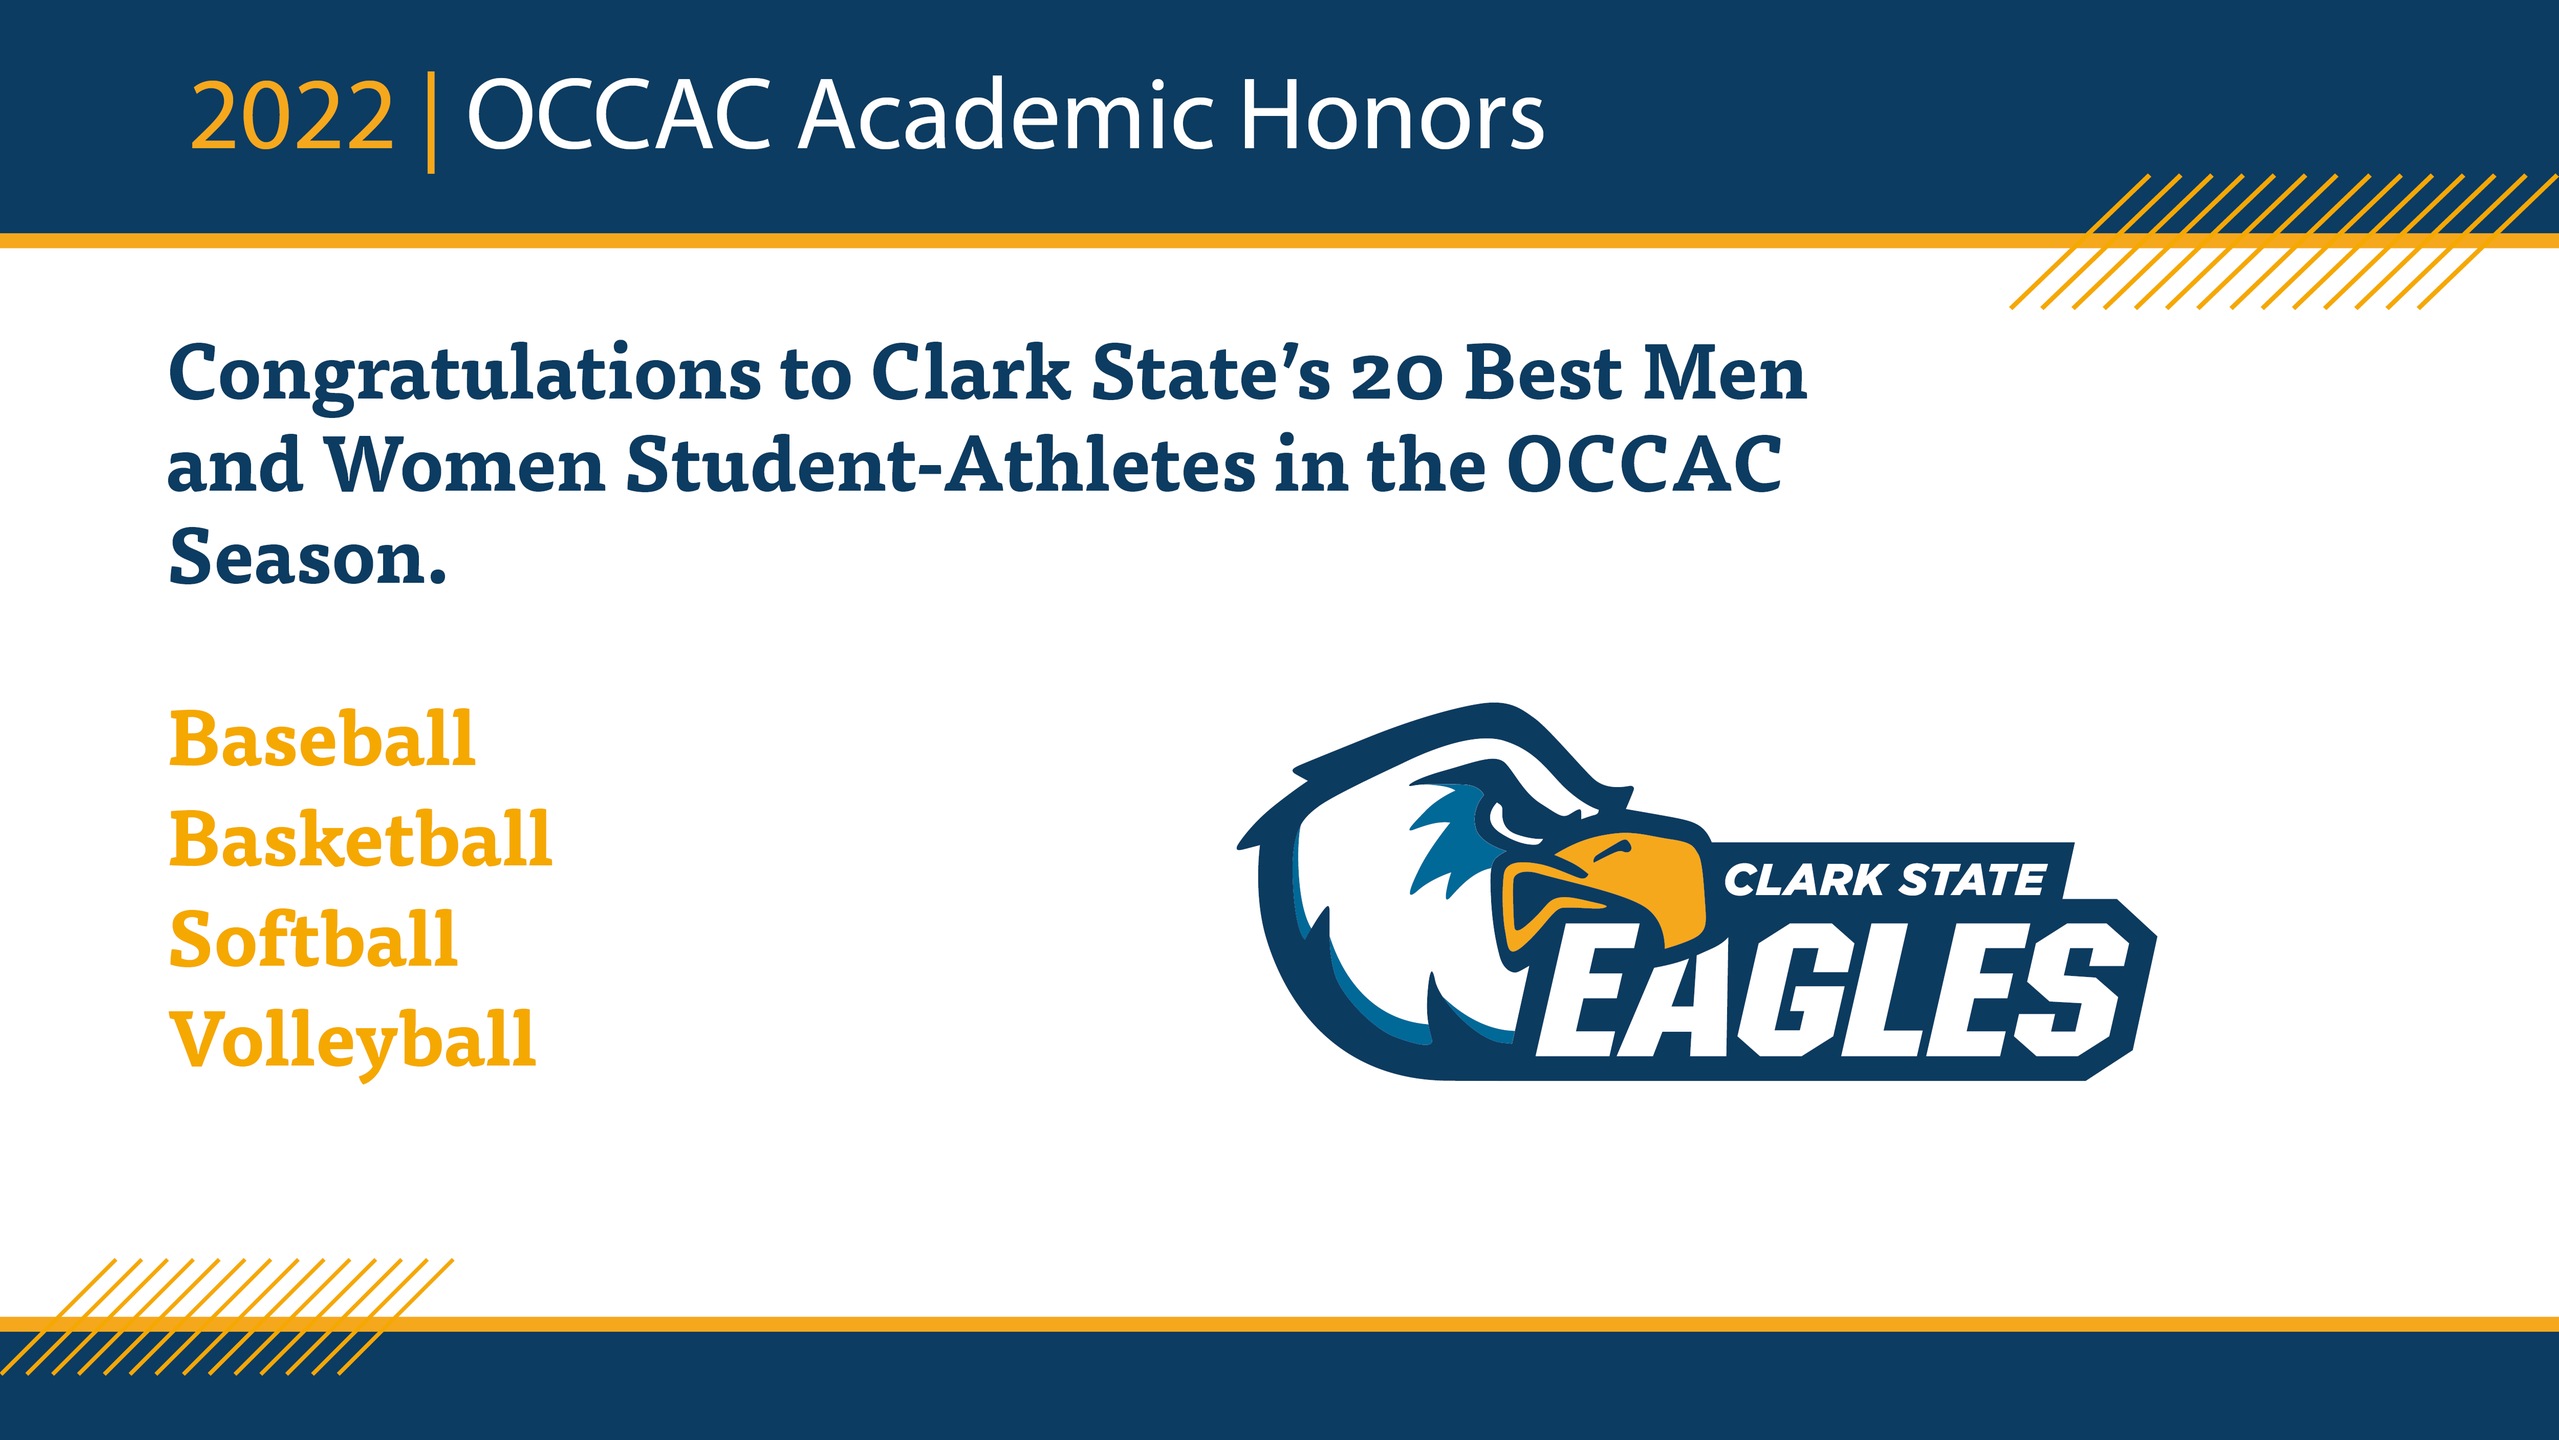 Twenty Clark State Student Athletes Bring Home OCCAC Academic Honors